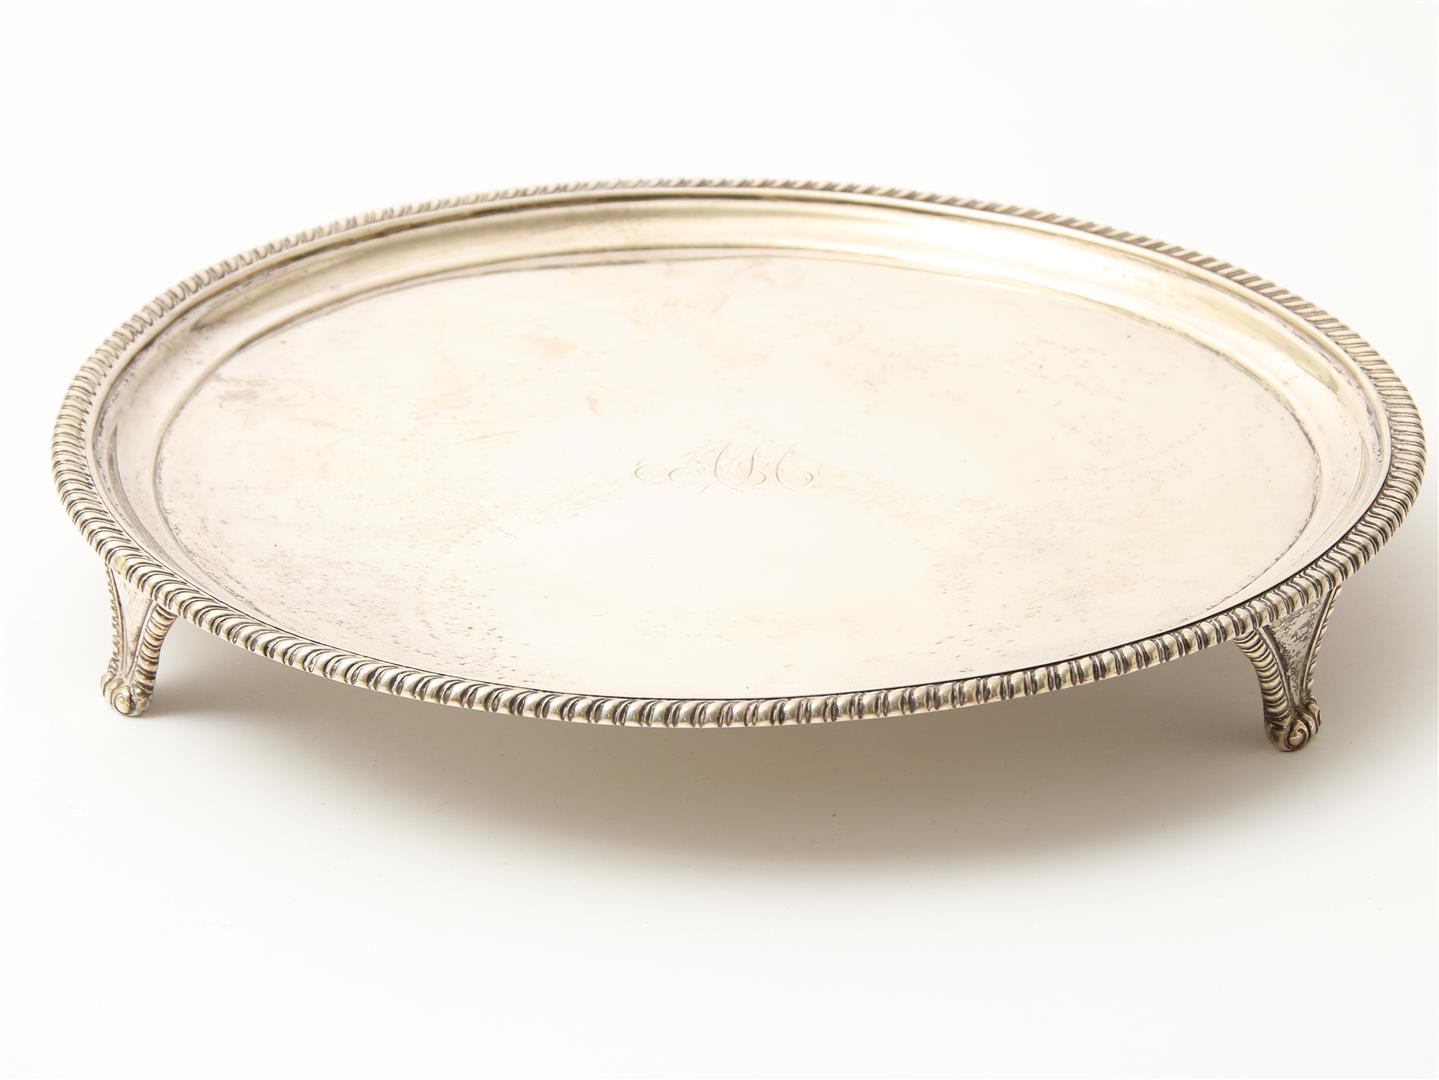 Silver round Georgian tray with ribbed edge on 3 curly legs, England, London, year letter "o", 1789,